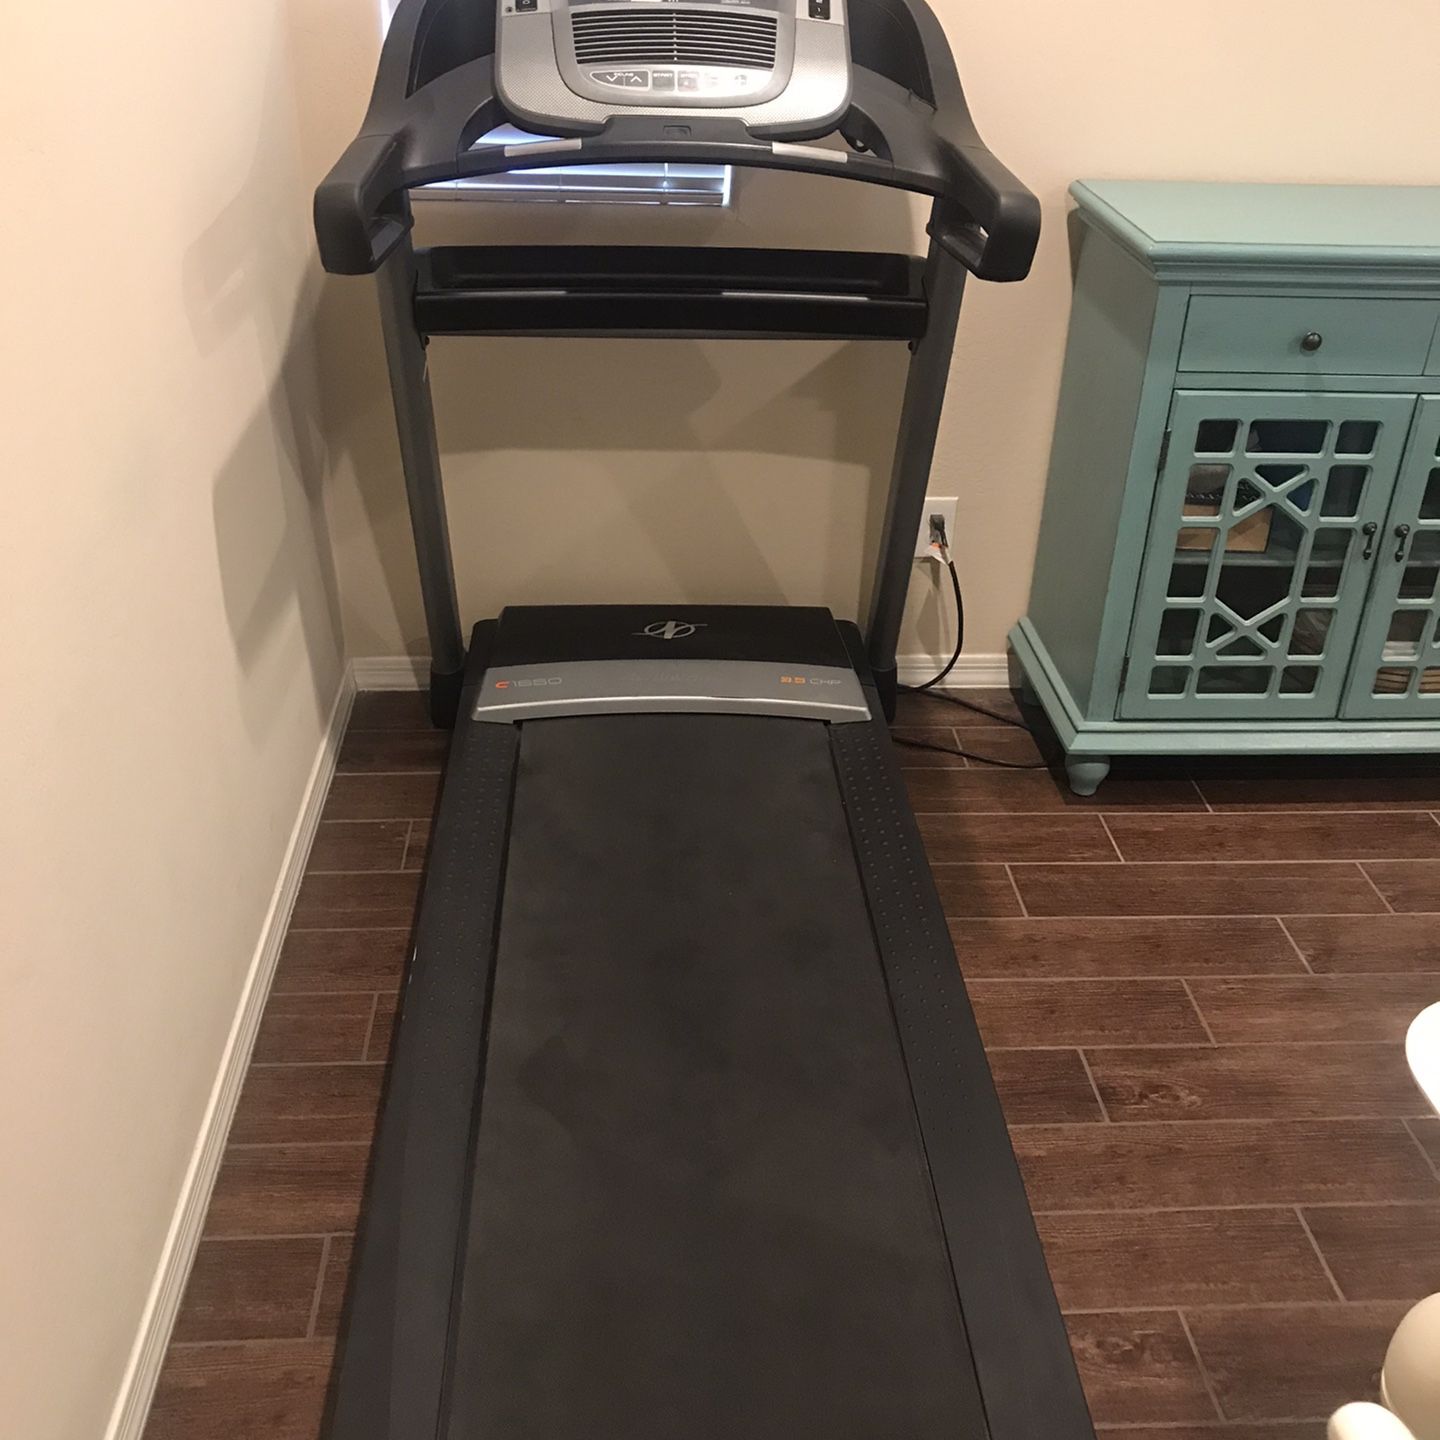 NordicTrack C 1650 With IFIT